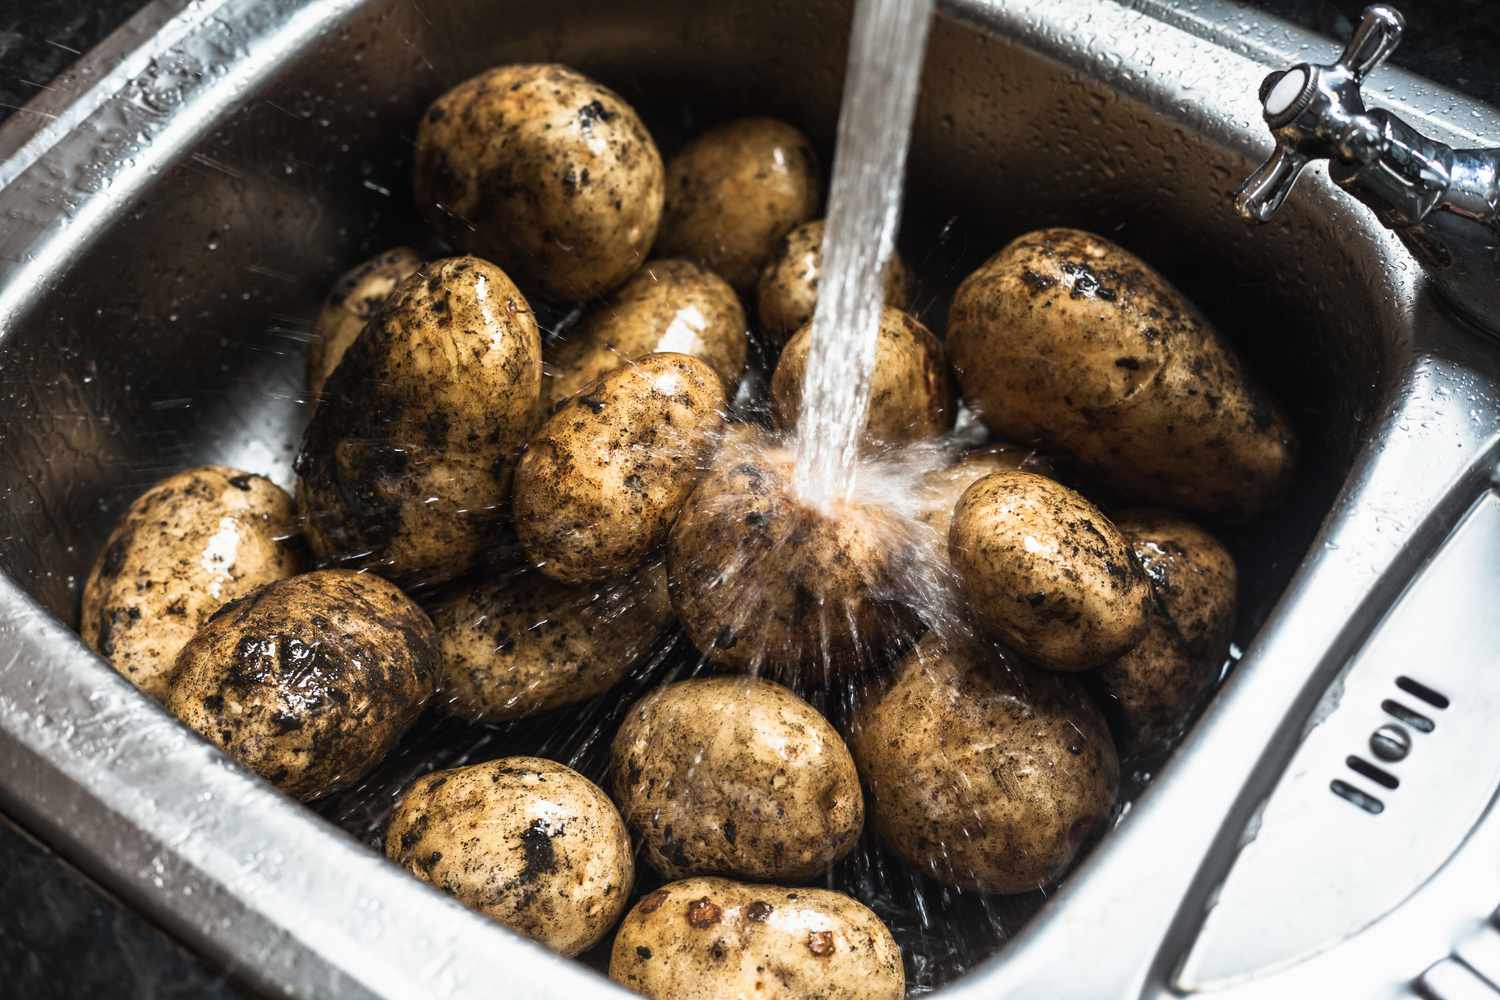 How To Clean Potatoes Without A Brush